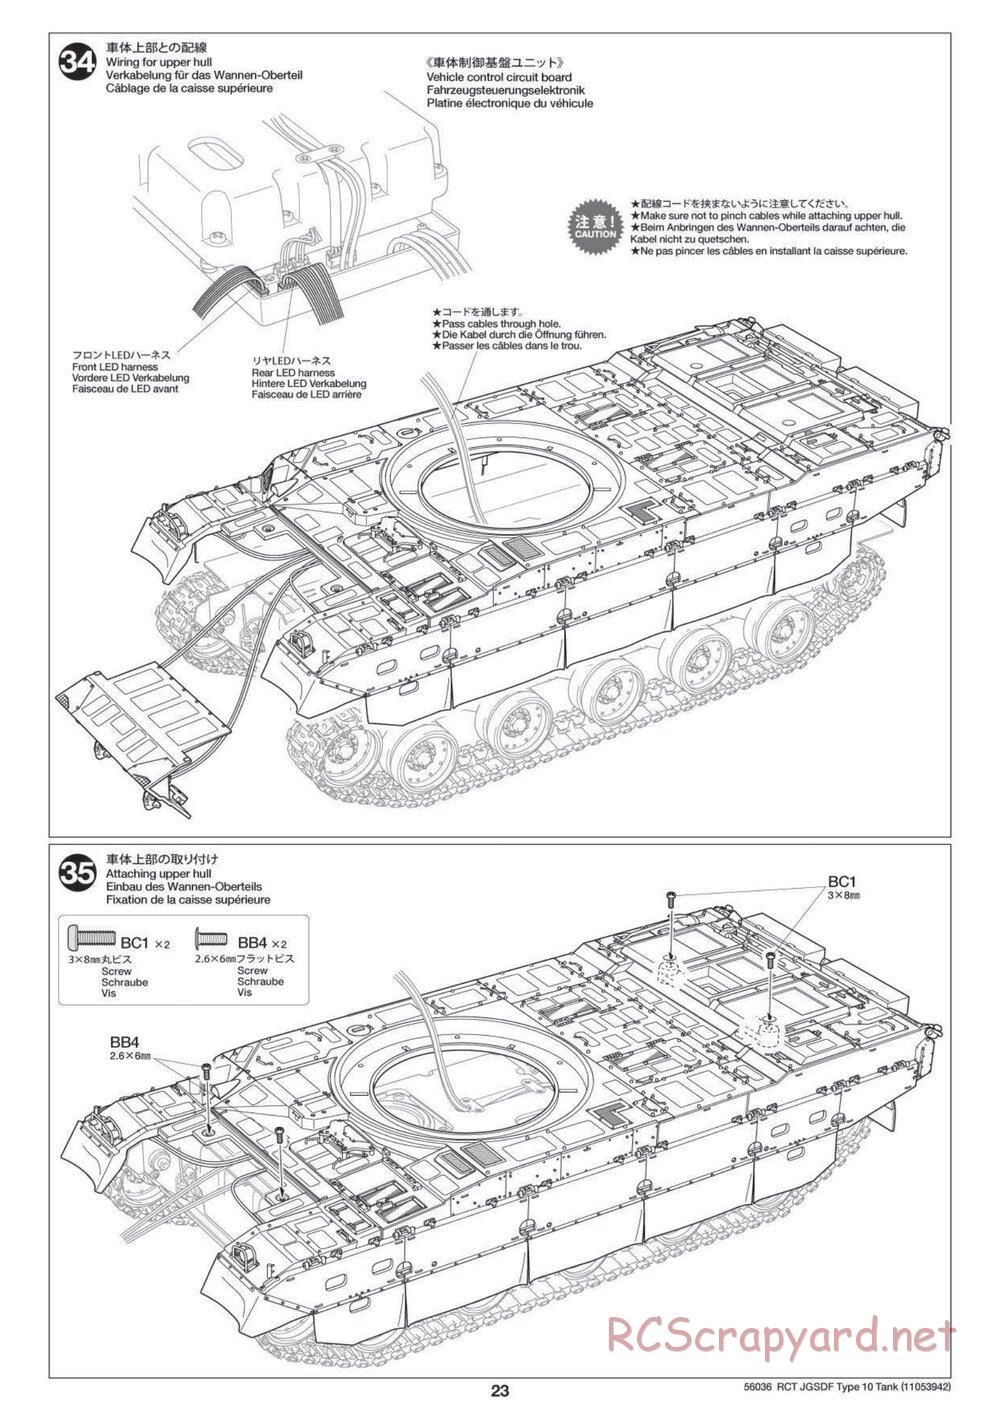 Tamiya - JGSDF Type 10 Tank - 1/16 Scale Chassis - Manual - Page 23